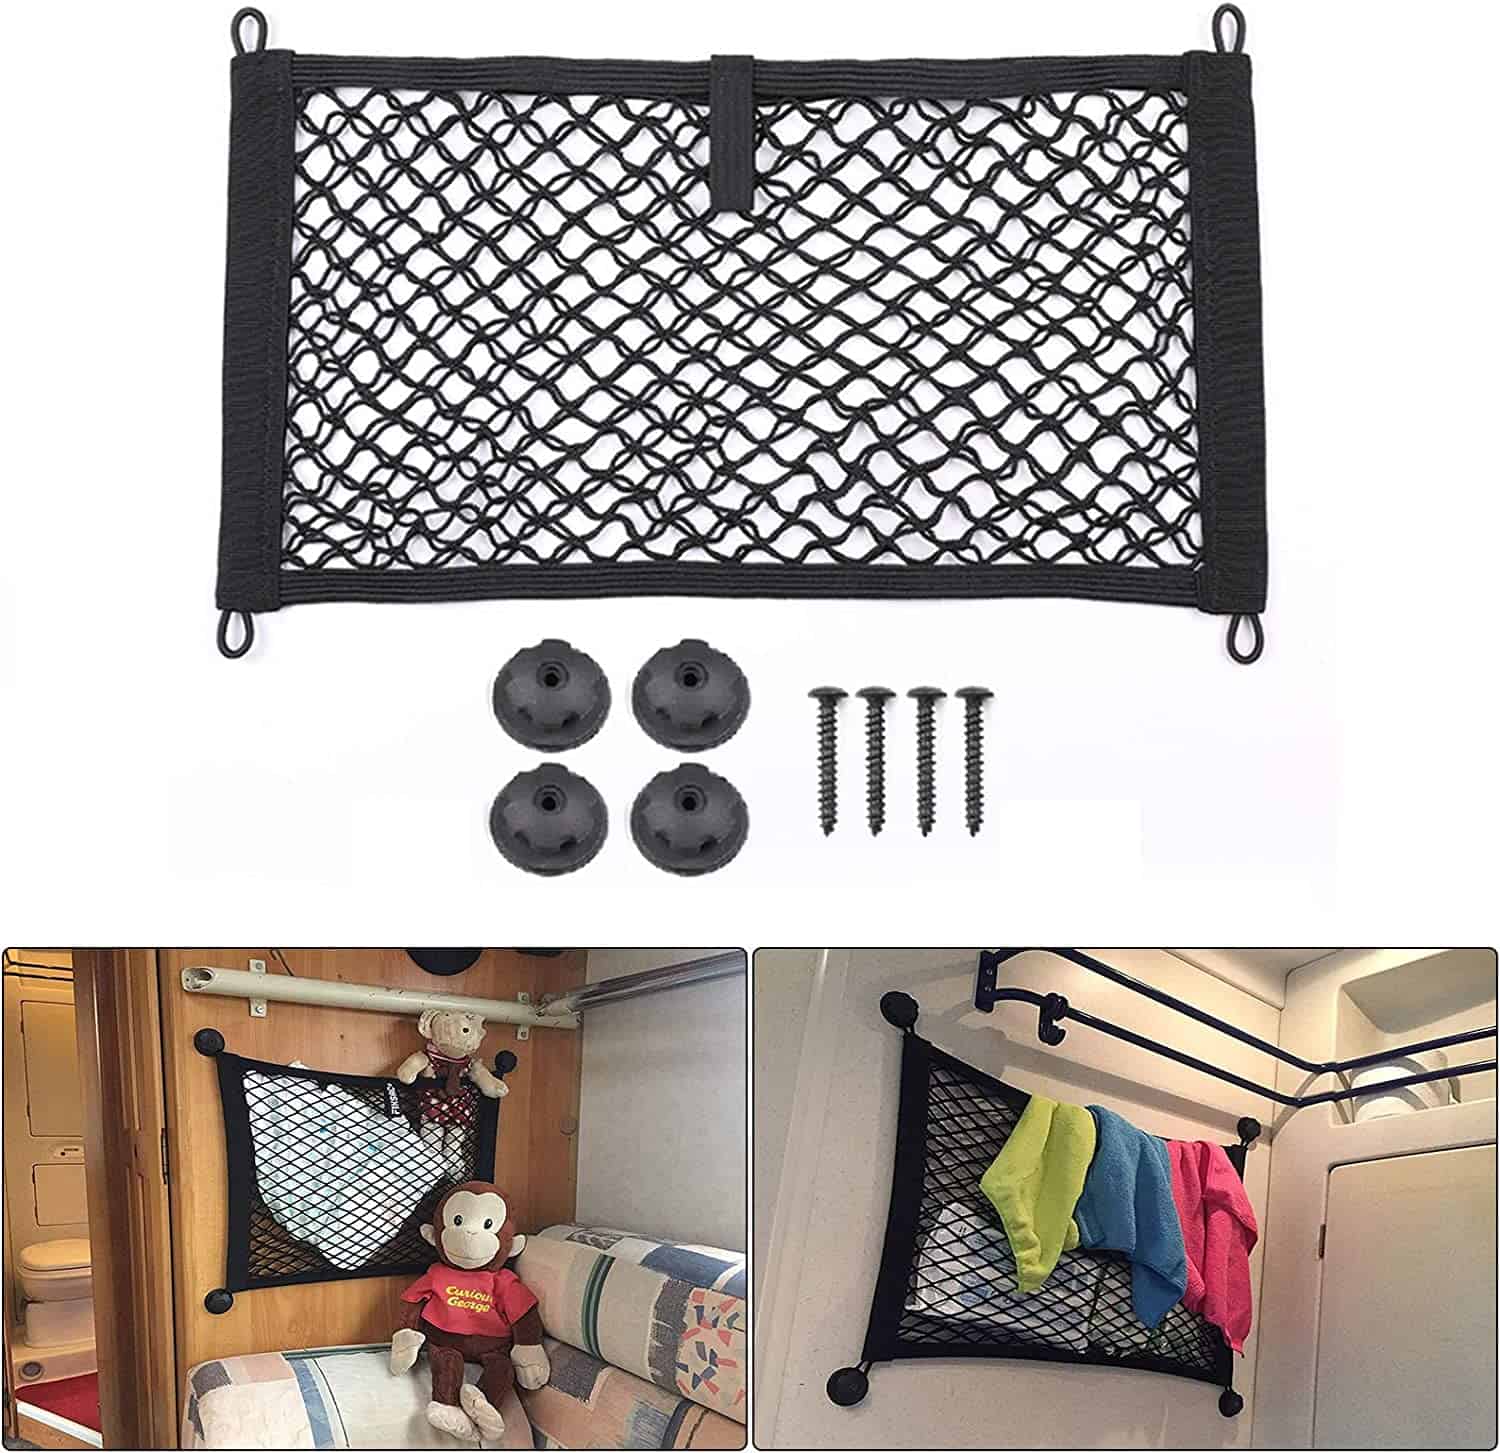 Car cargo net mounted to RV walls holding cleaning supplies, towels, and other clutter.